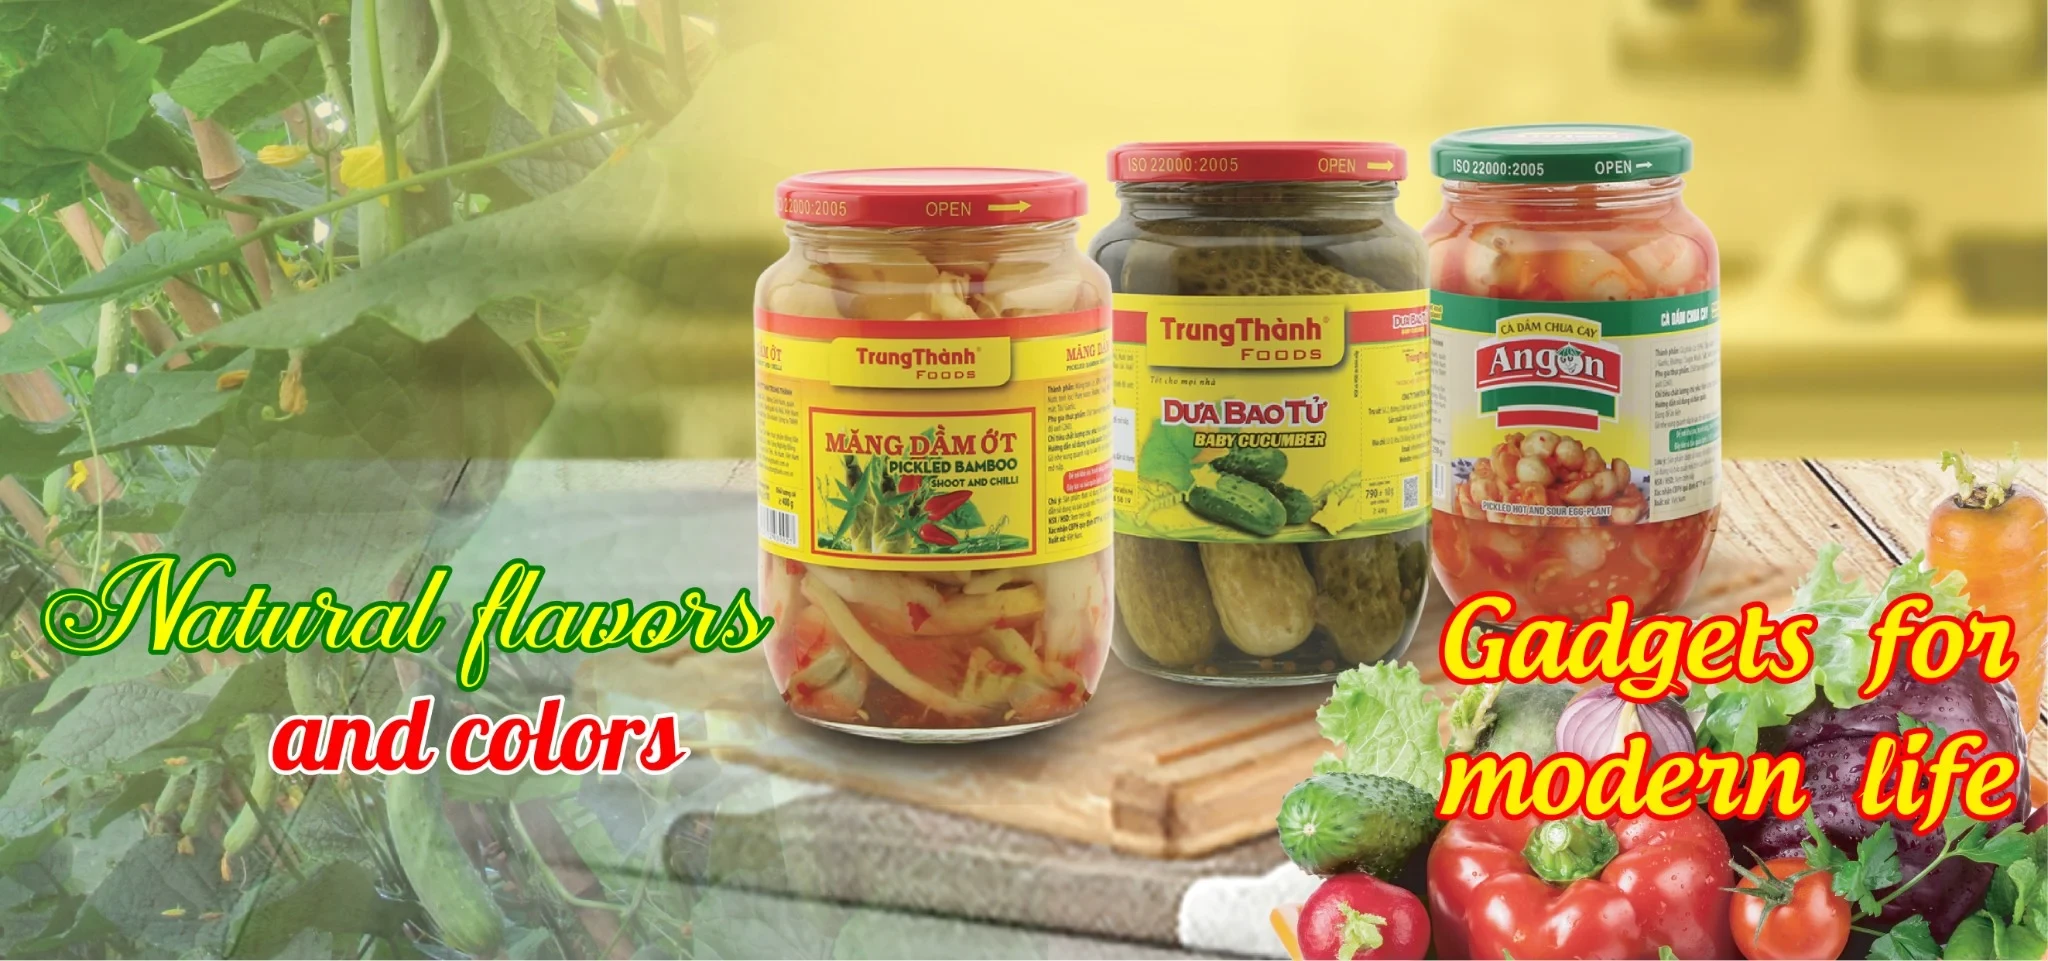 Trung Thanh Foods